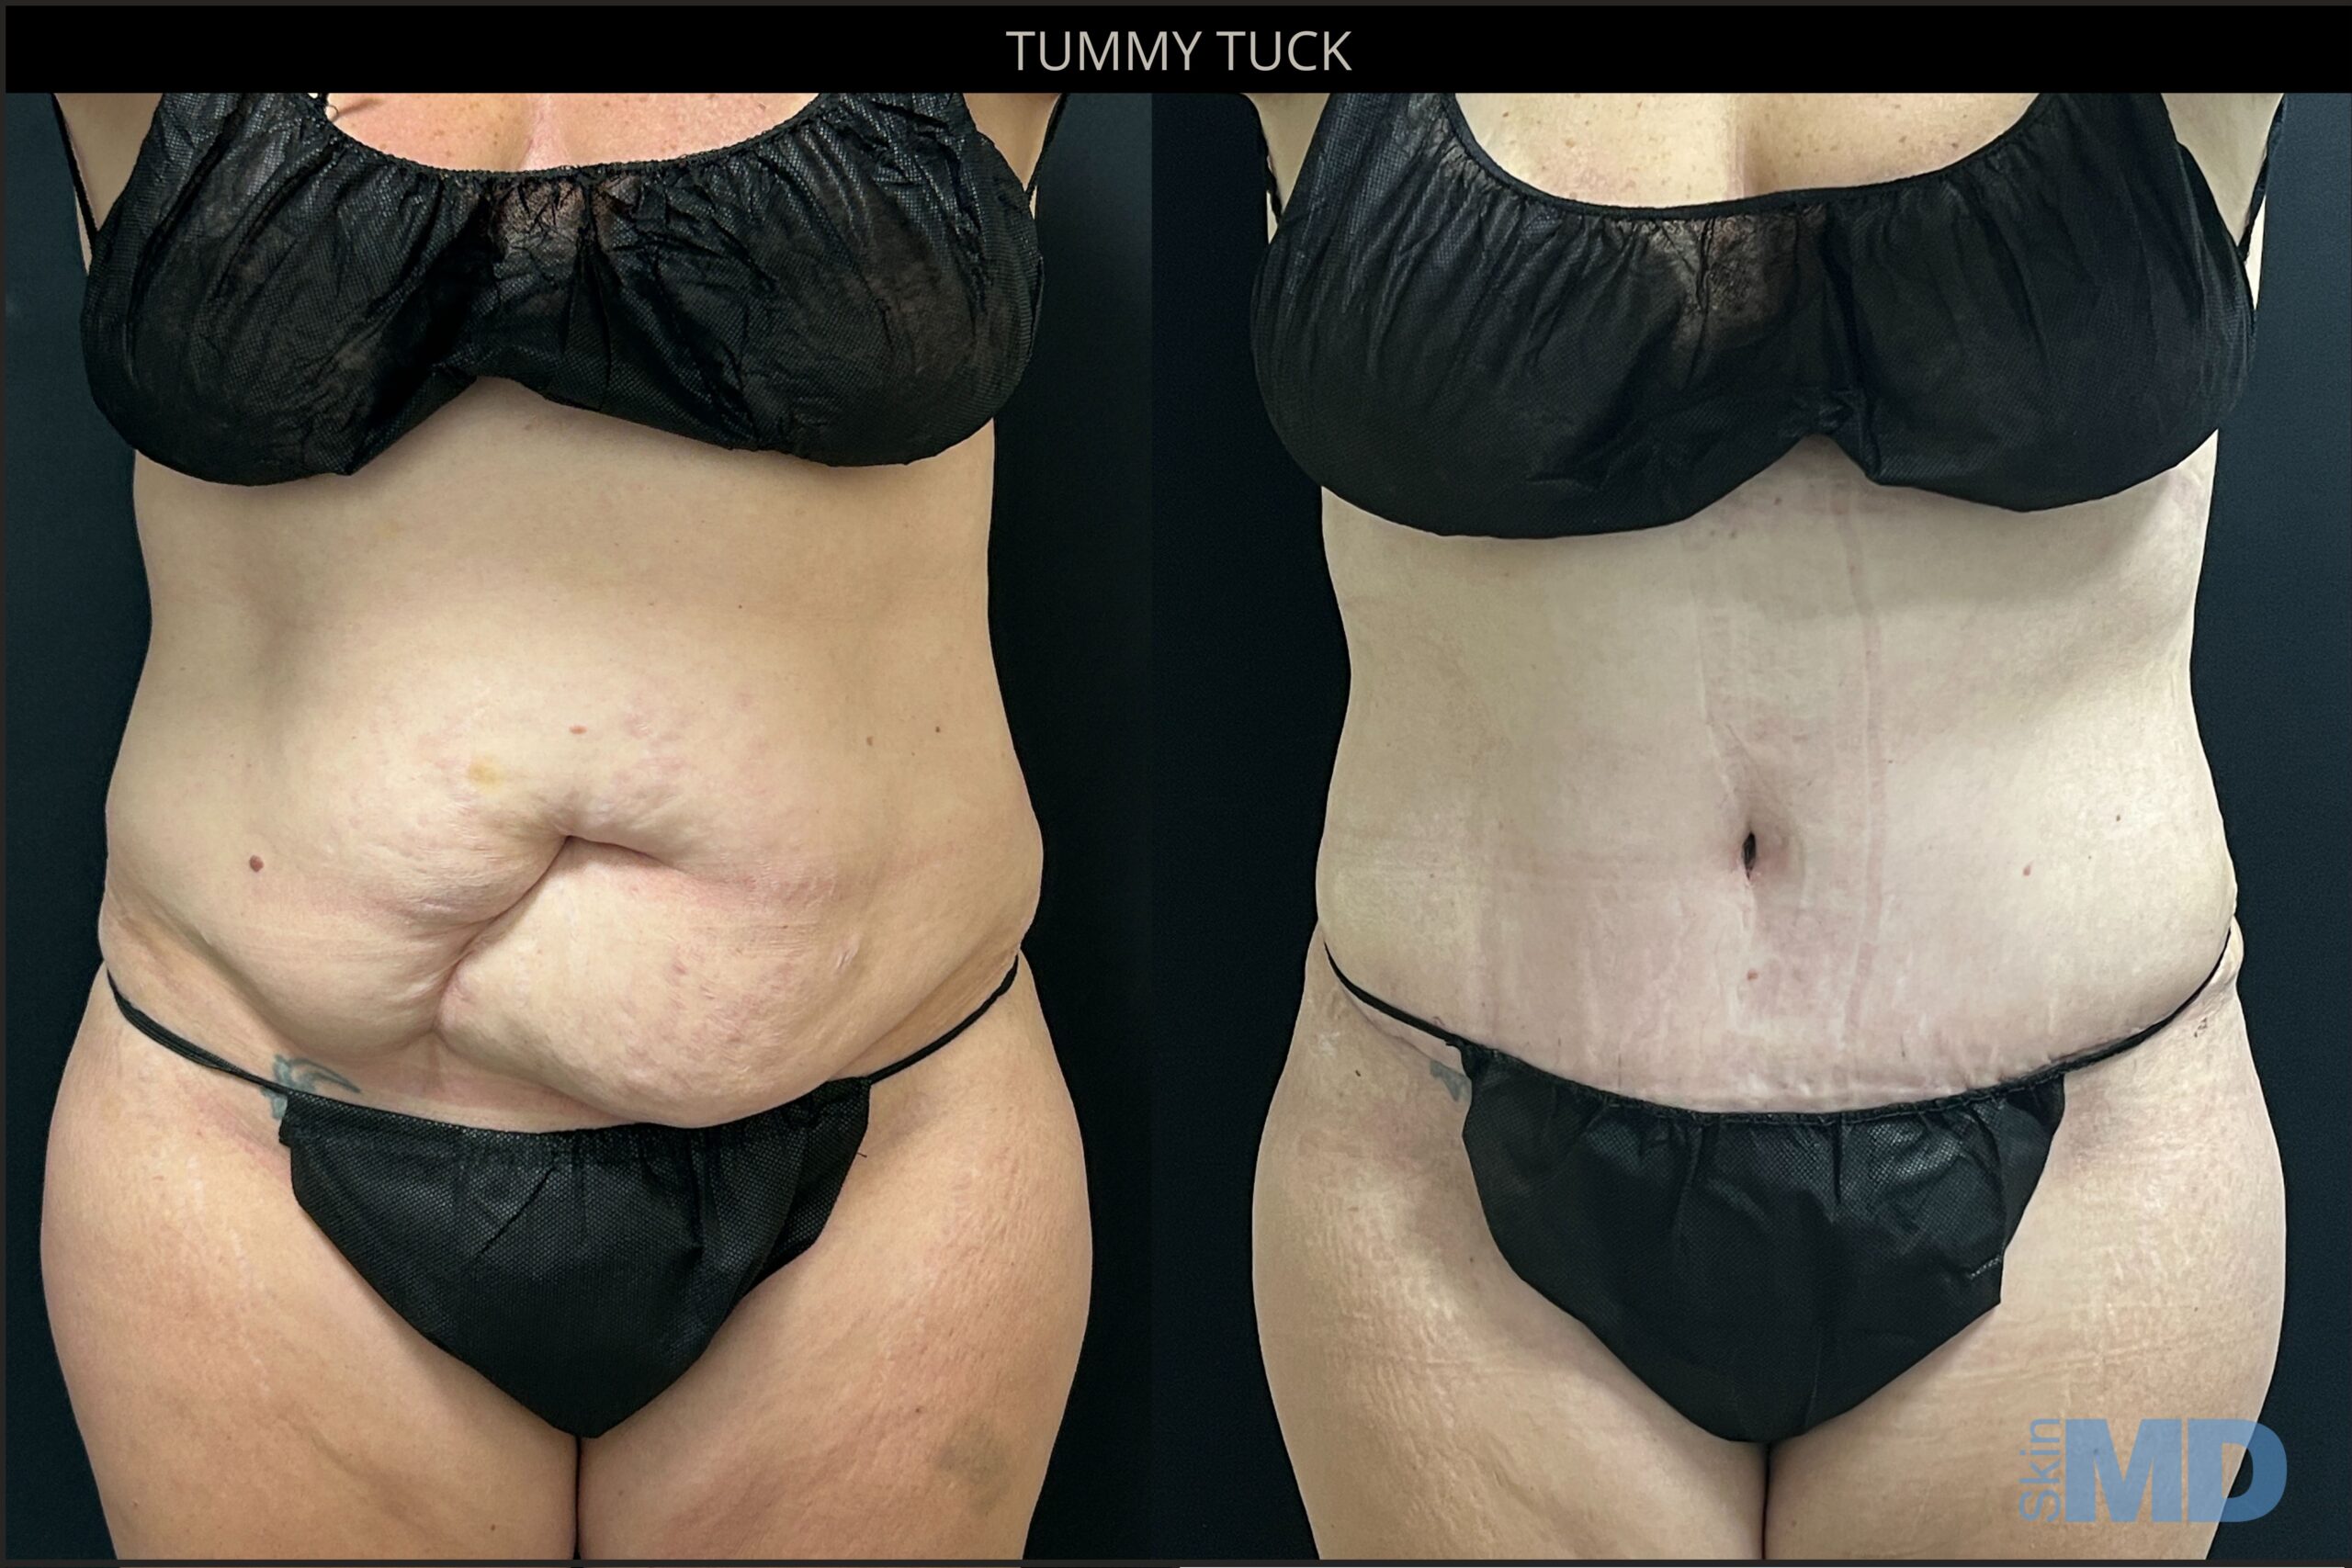 Before and after tummy tuck results